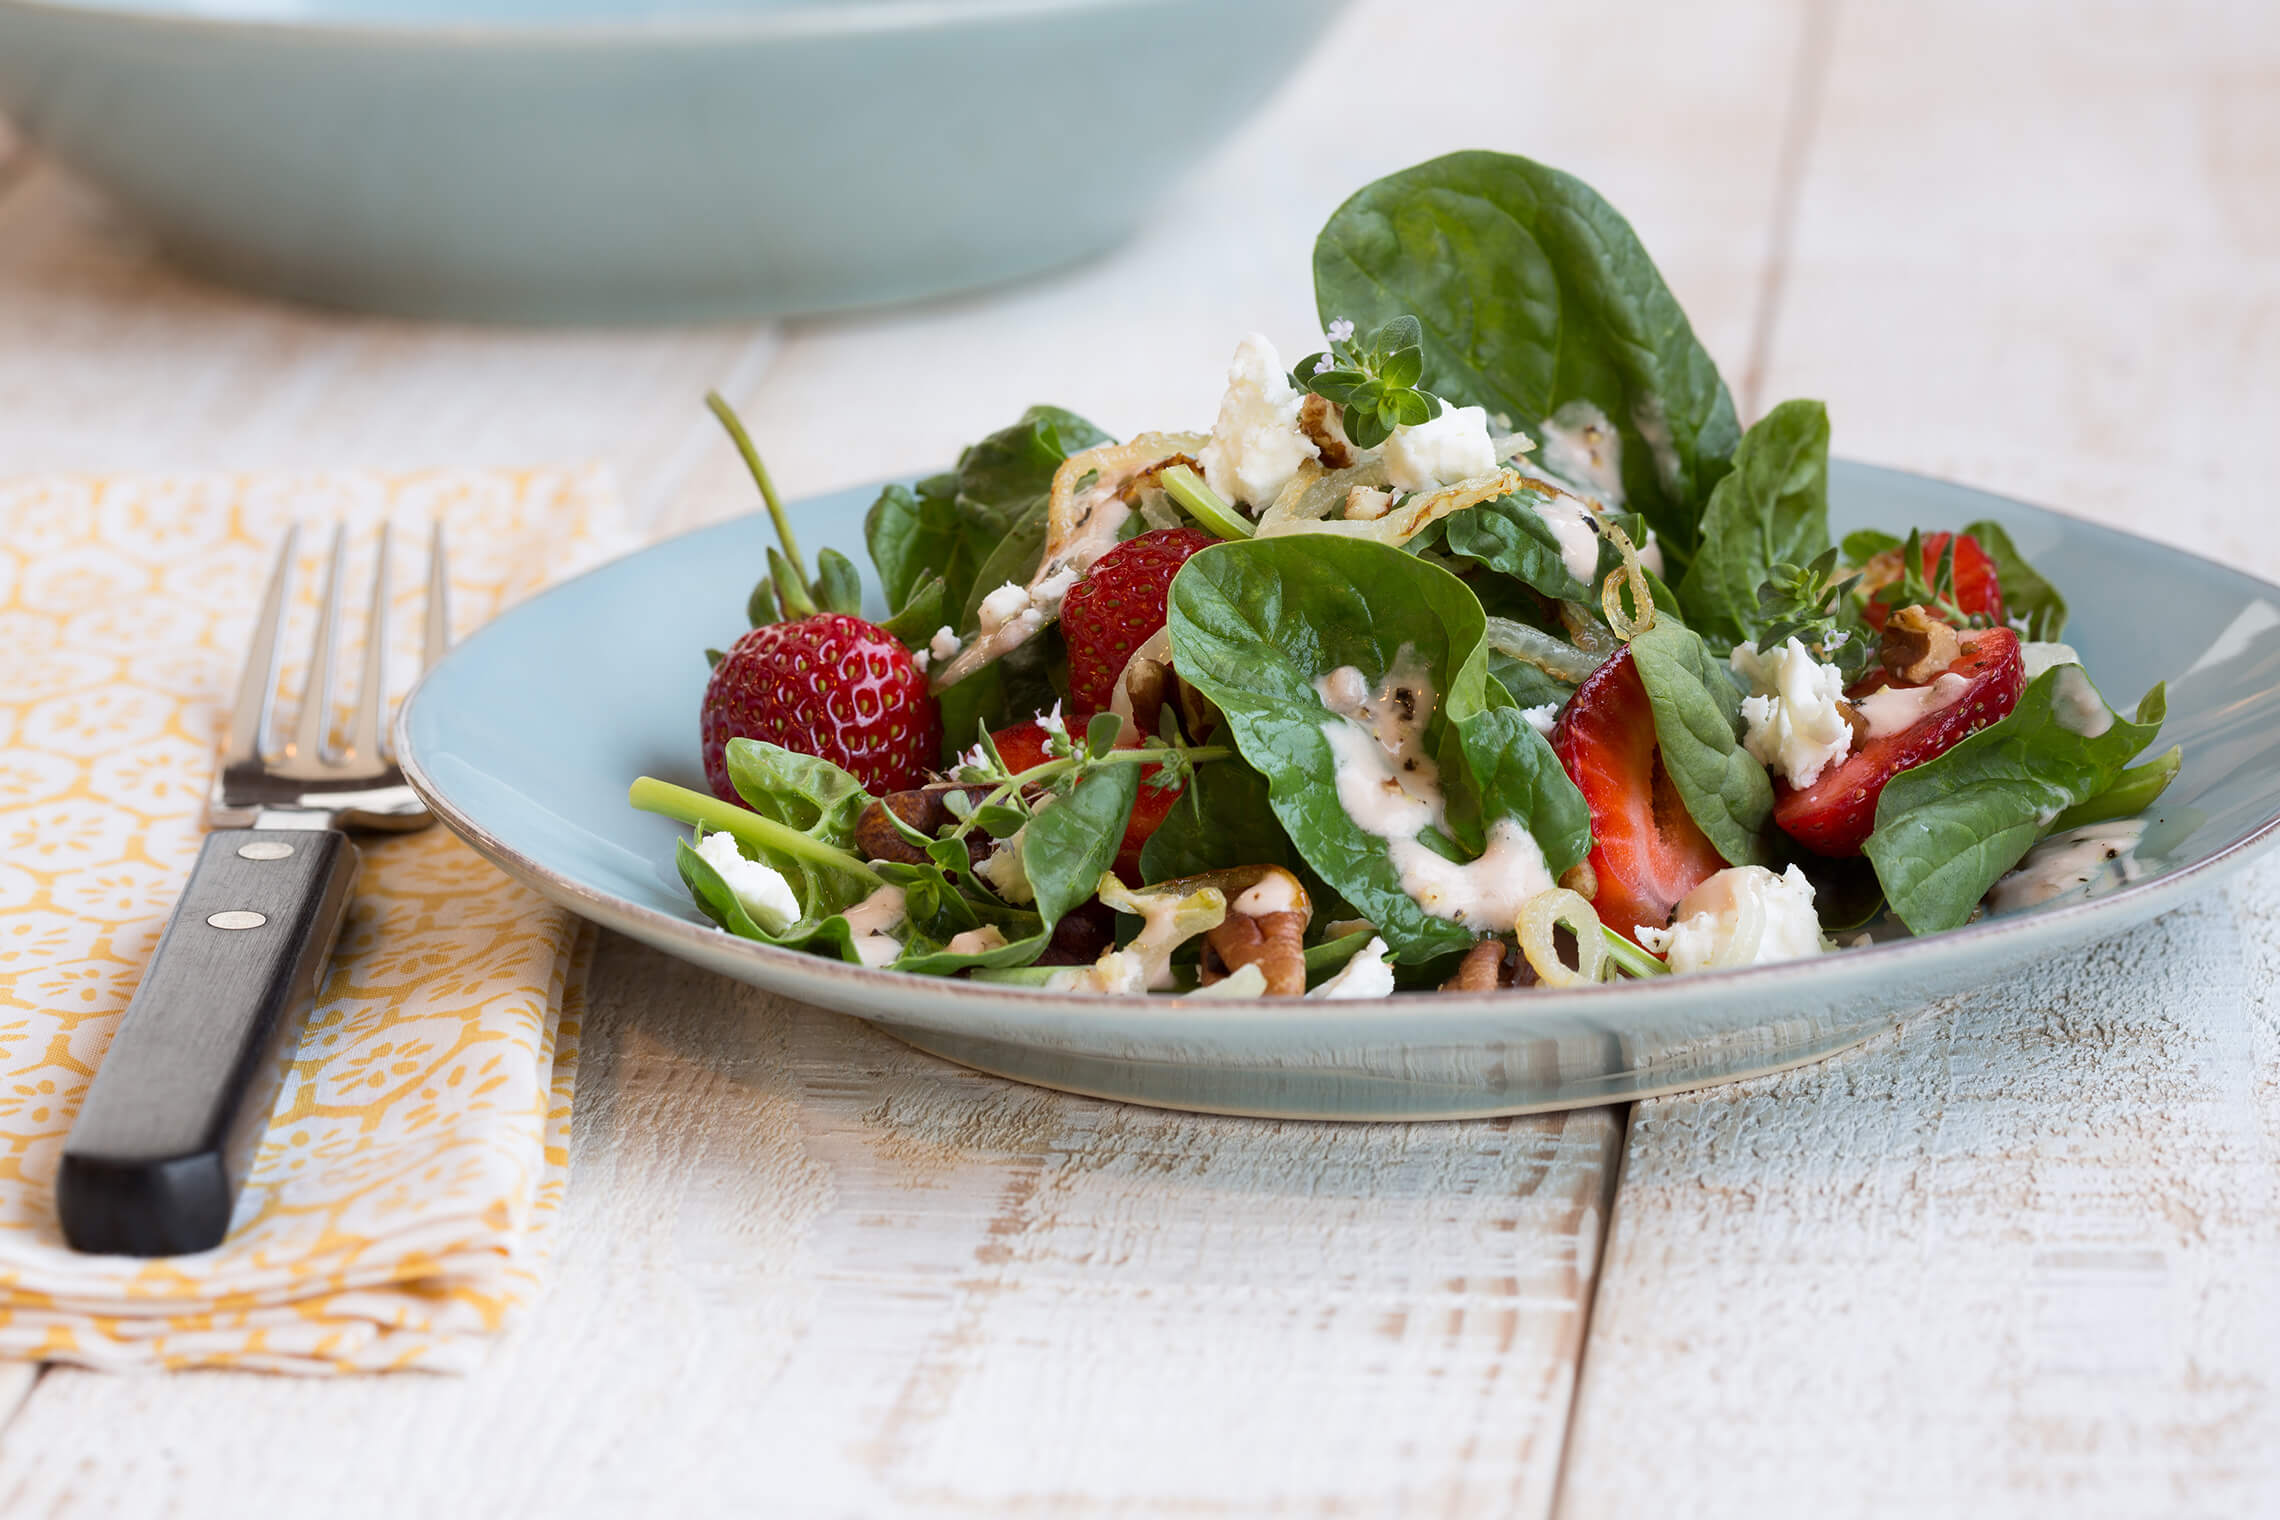 Spinach Strawberry Salad with Strawberry Balsamic Dressing